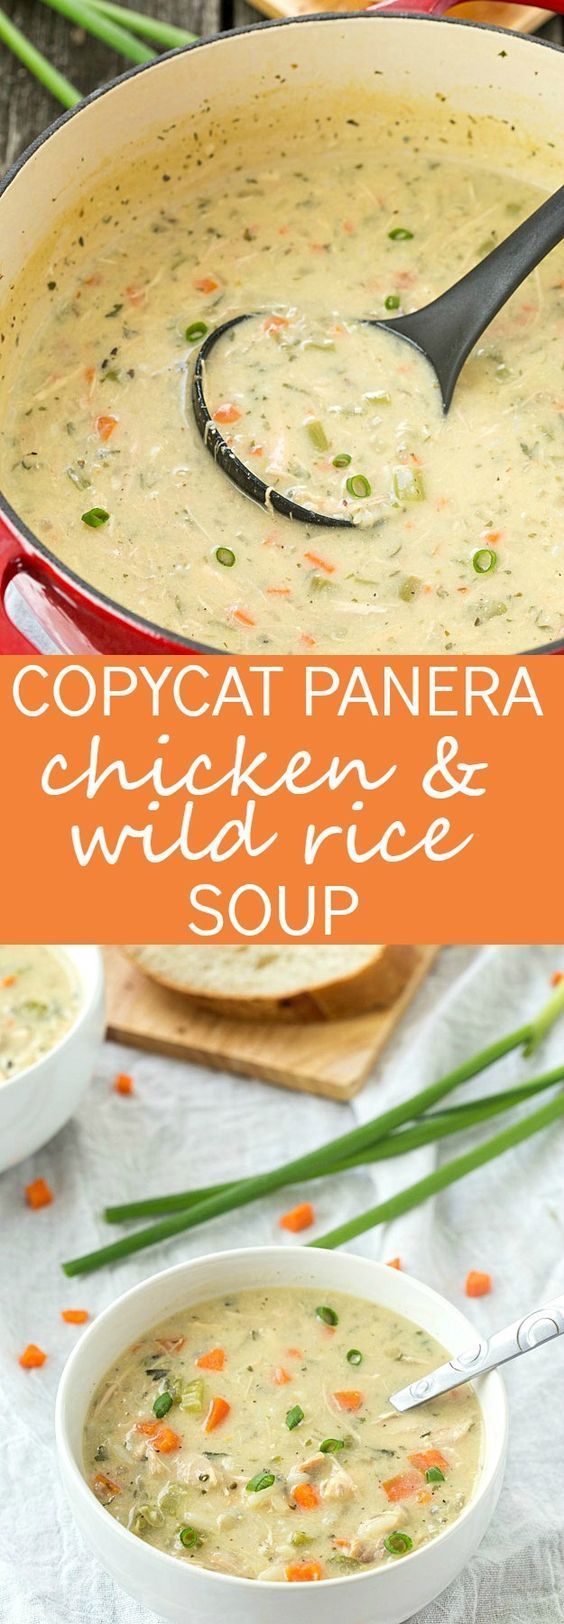 Copycat Panera Chicken and Wild Rice Soup Recipe – The best soup ever! Its creamy, flavorful, and